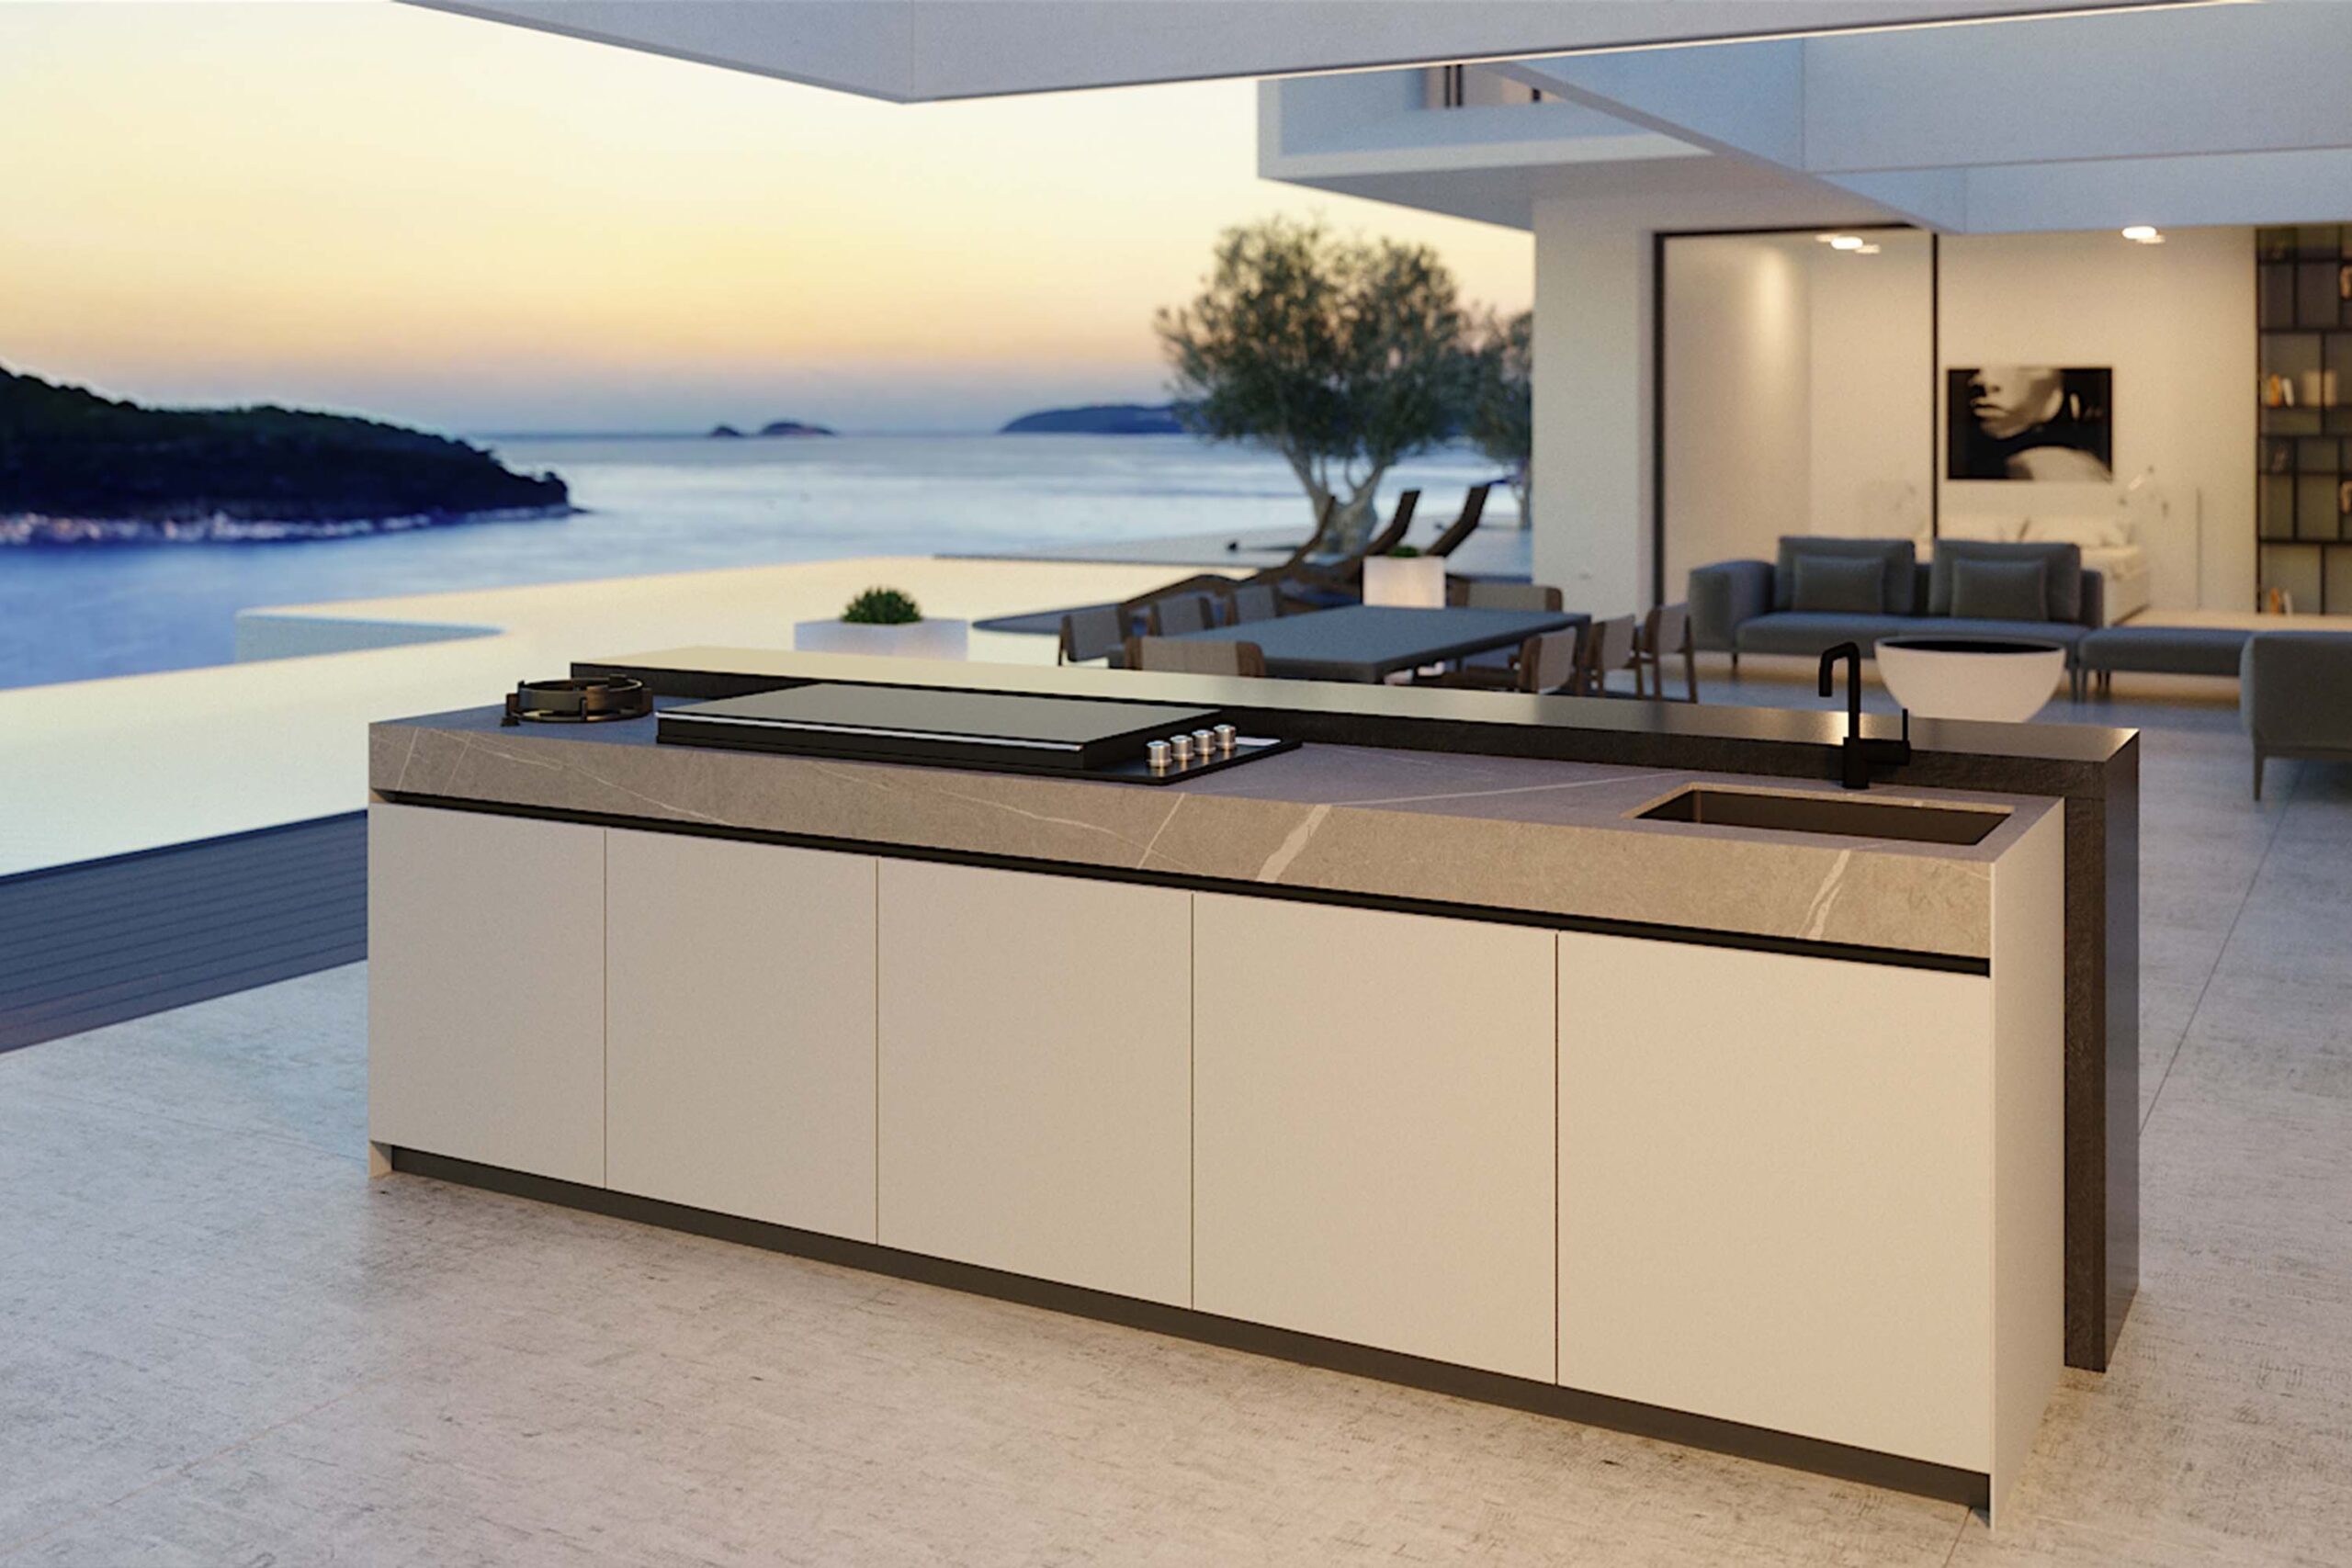 Luxury lacquered modern outdoor kitchen island with Dekton sirus rear facing bar. Designed and installed by Krieder UK.